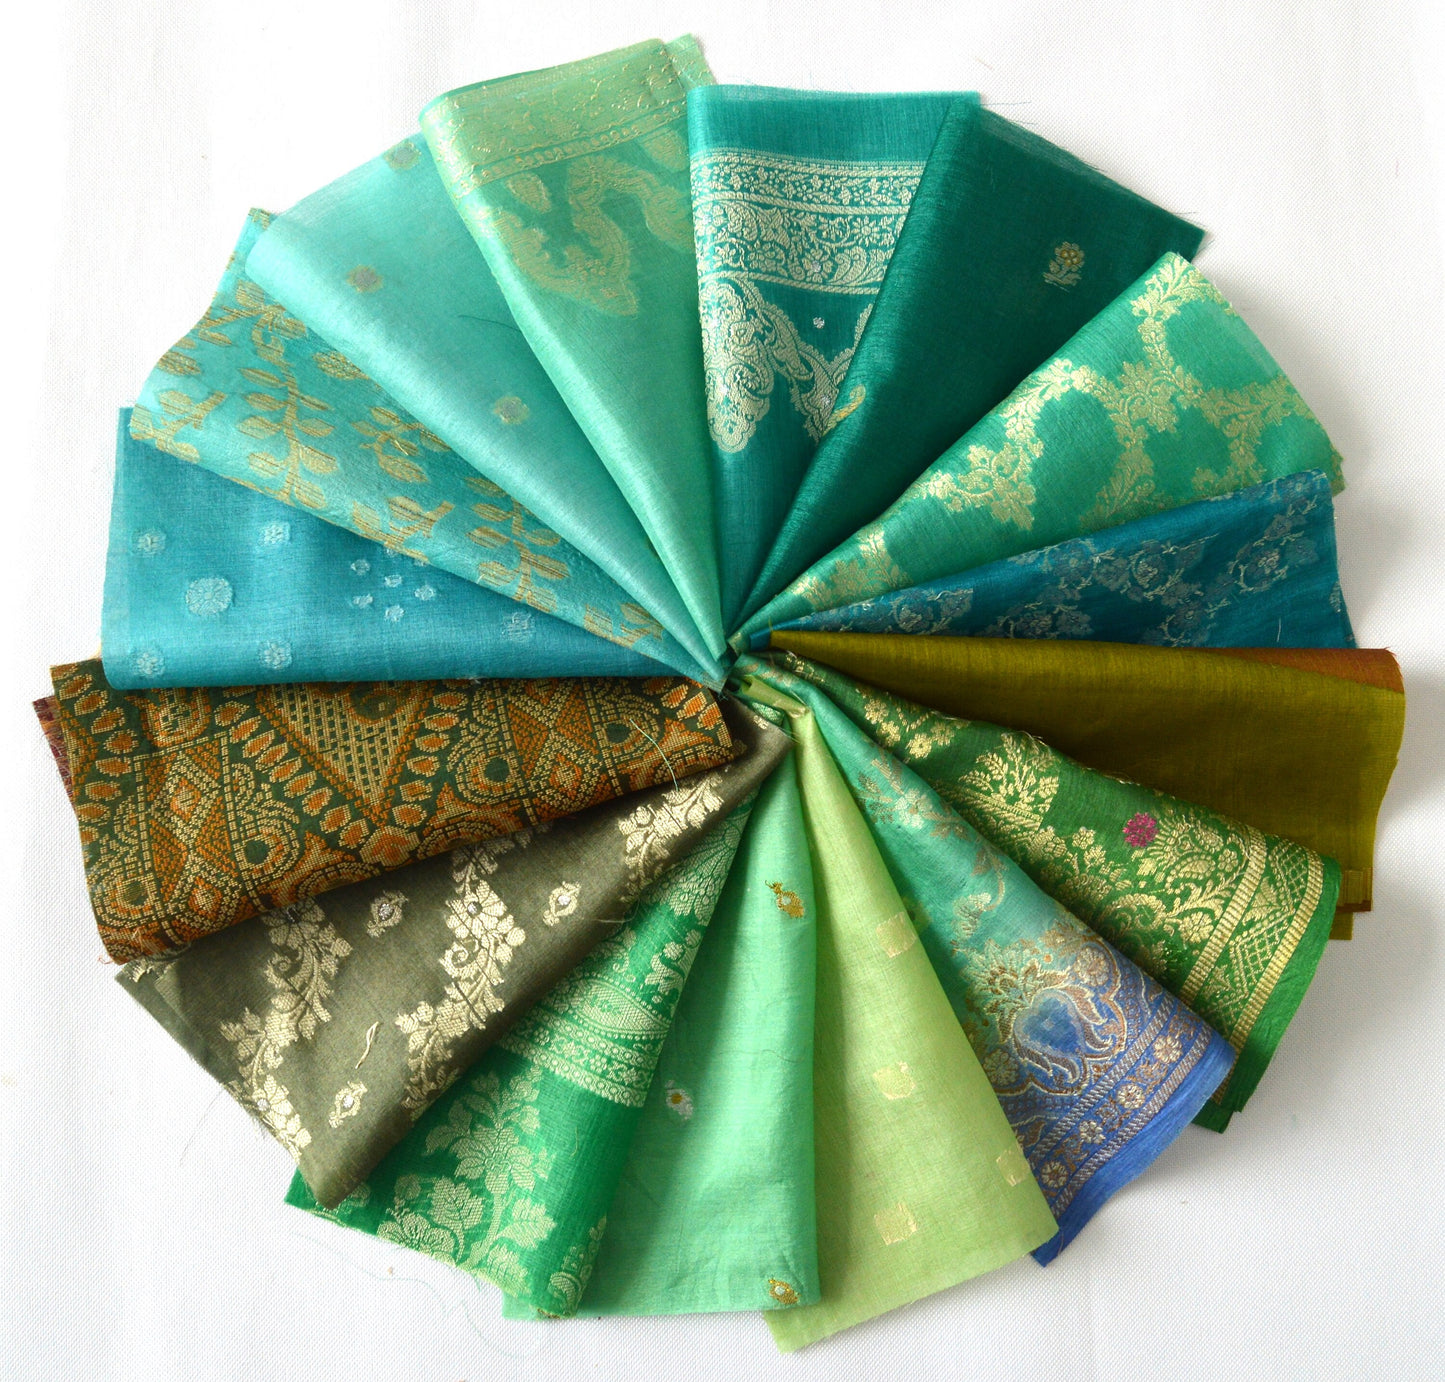 8 Inch x 16 Pieces Green Recycled Vintage Sari Squares Craft Fabric Card Making Collage Mixed Media Textile Art Sewing Junk Journal